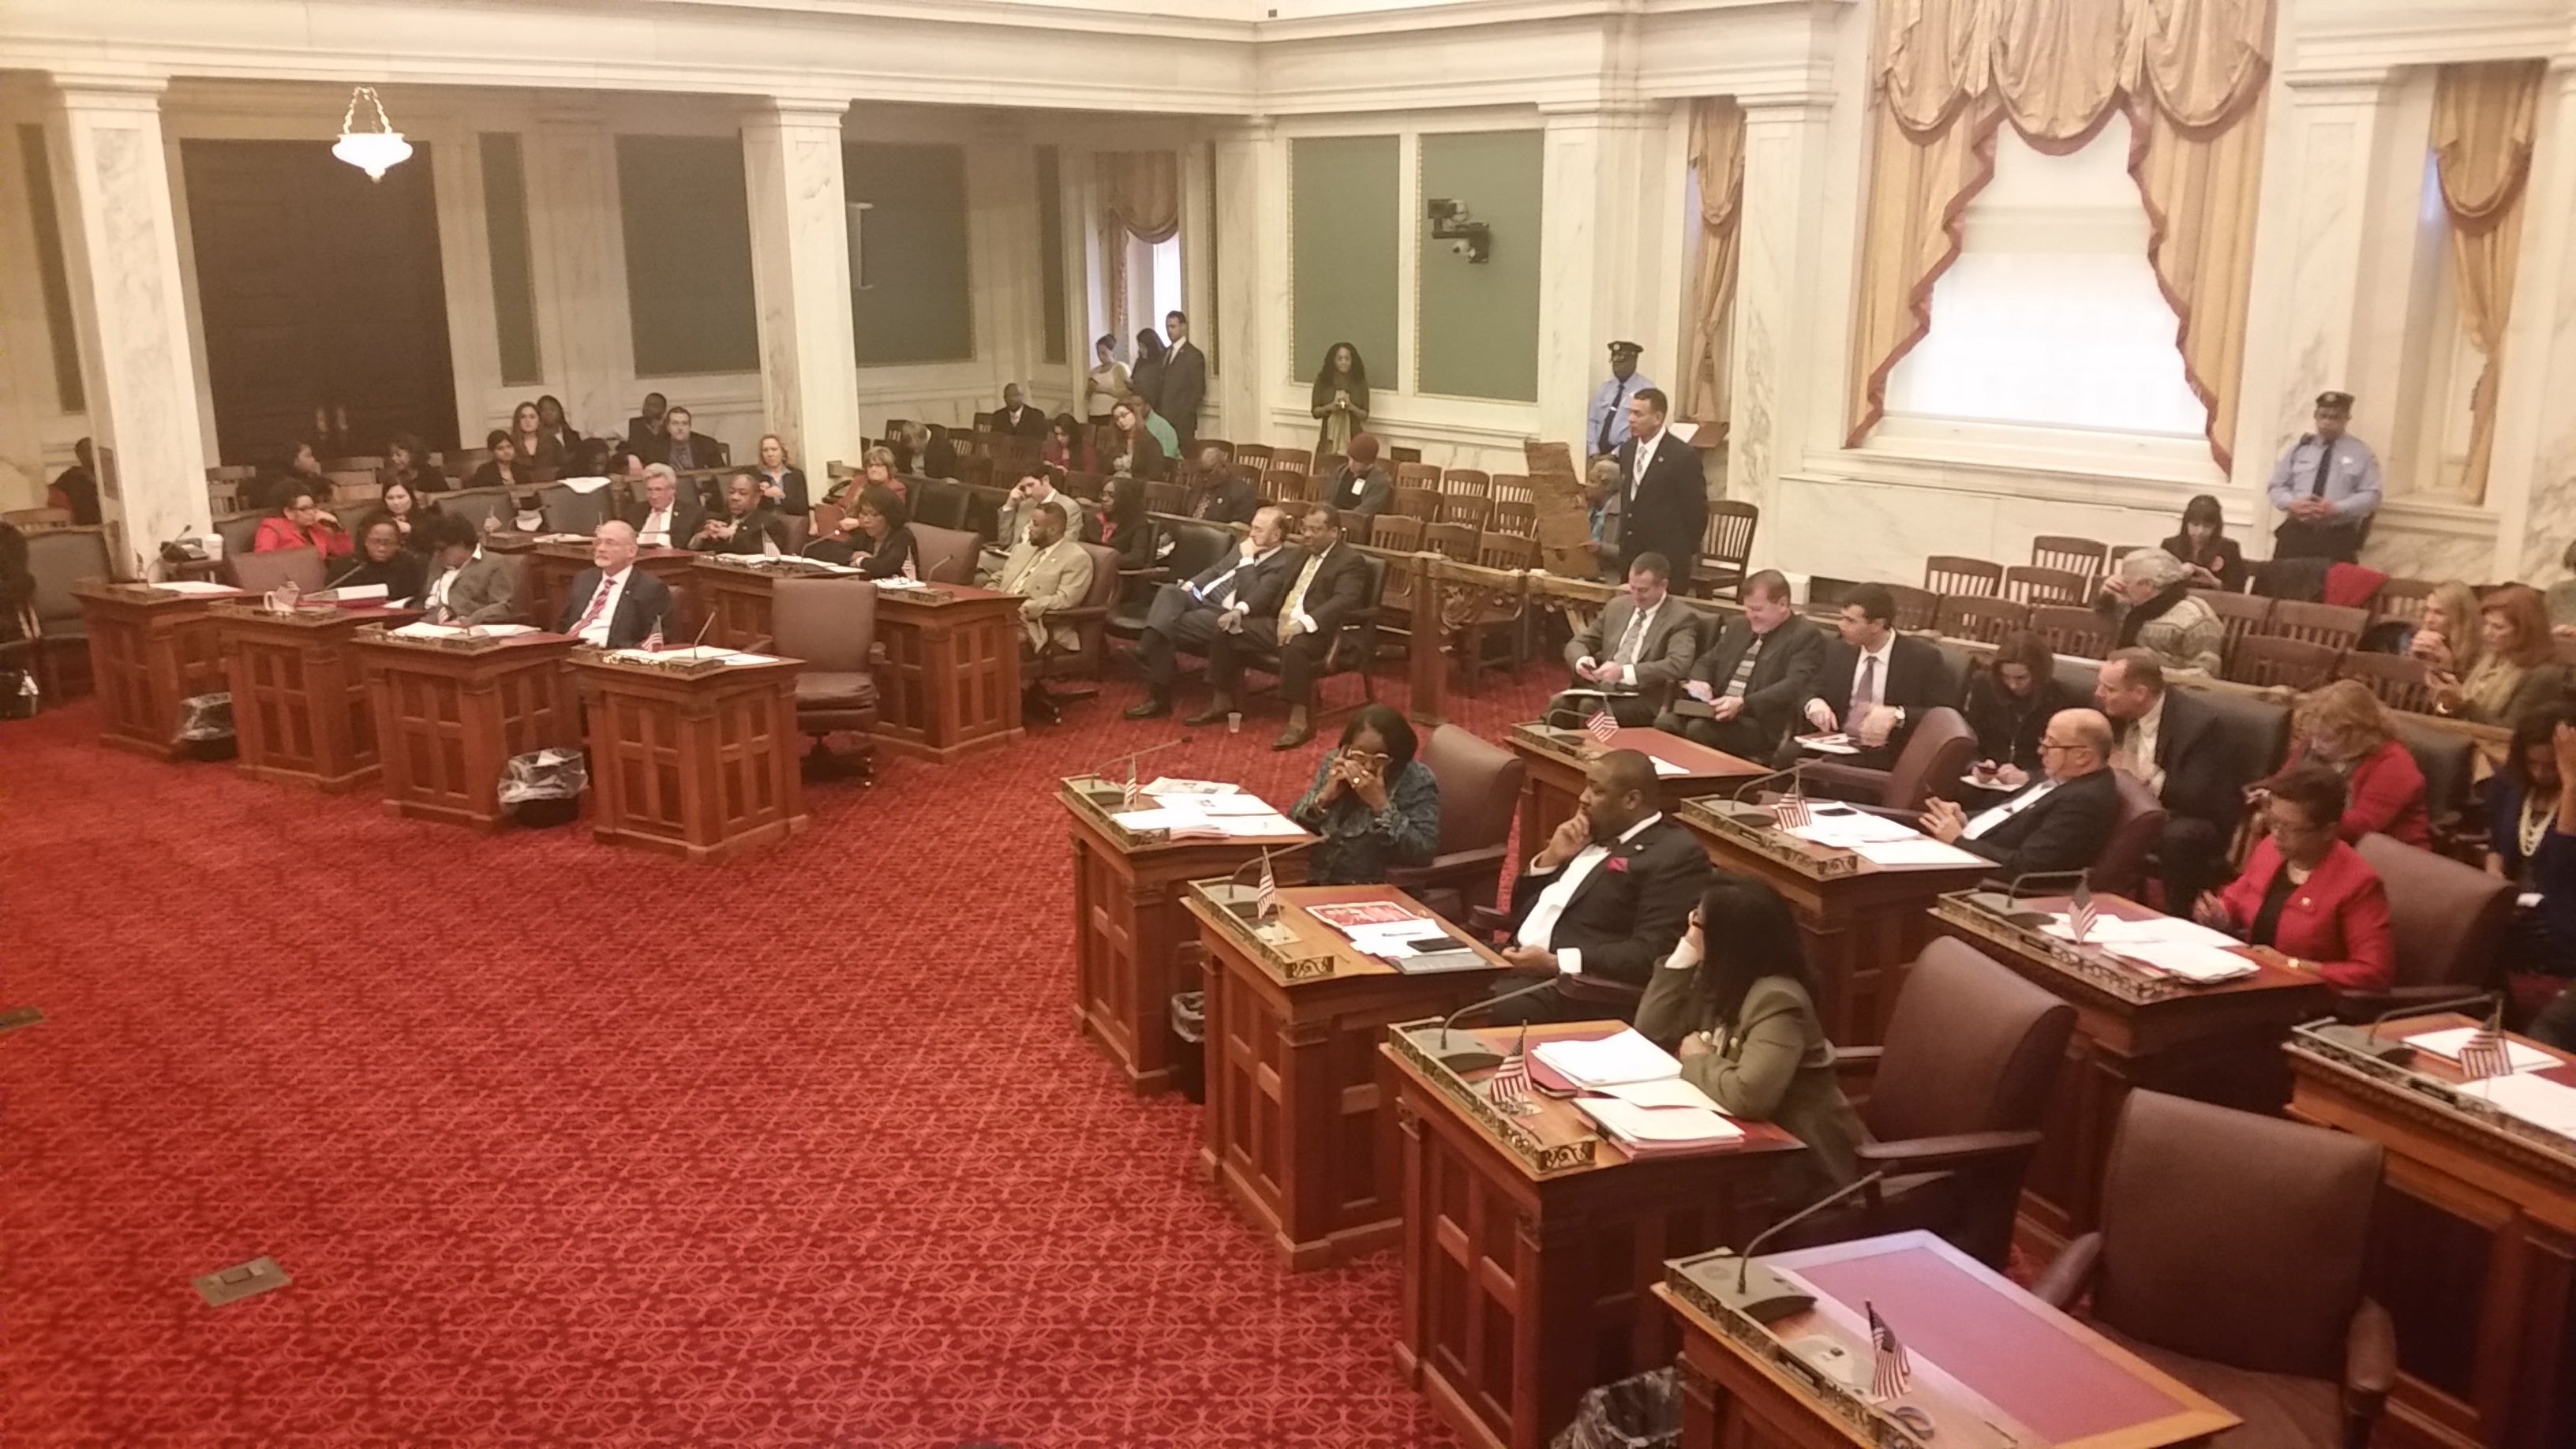  Philadelphia City Council members discuss increasing the annual fee for registering vacant properties from $150 to $300. (Tom MacDonald/WHYY) 